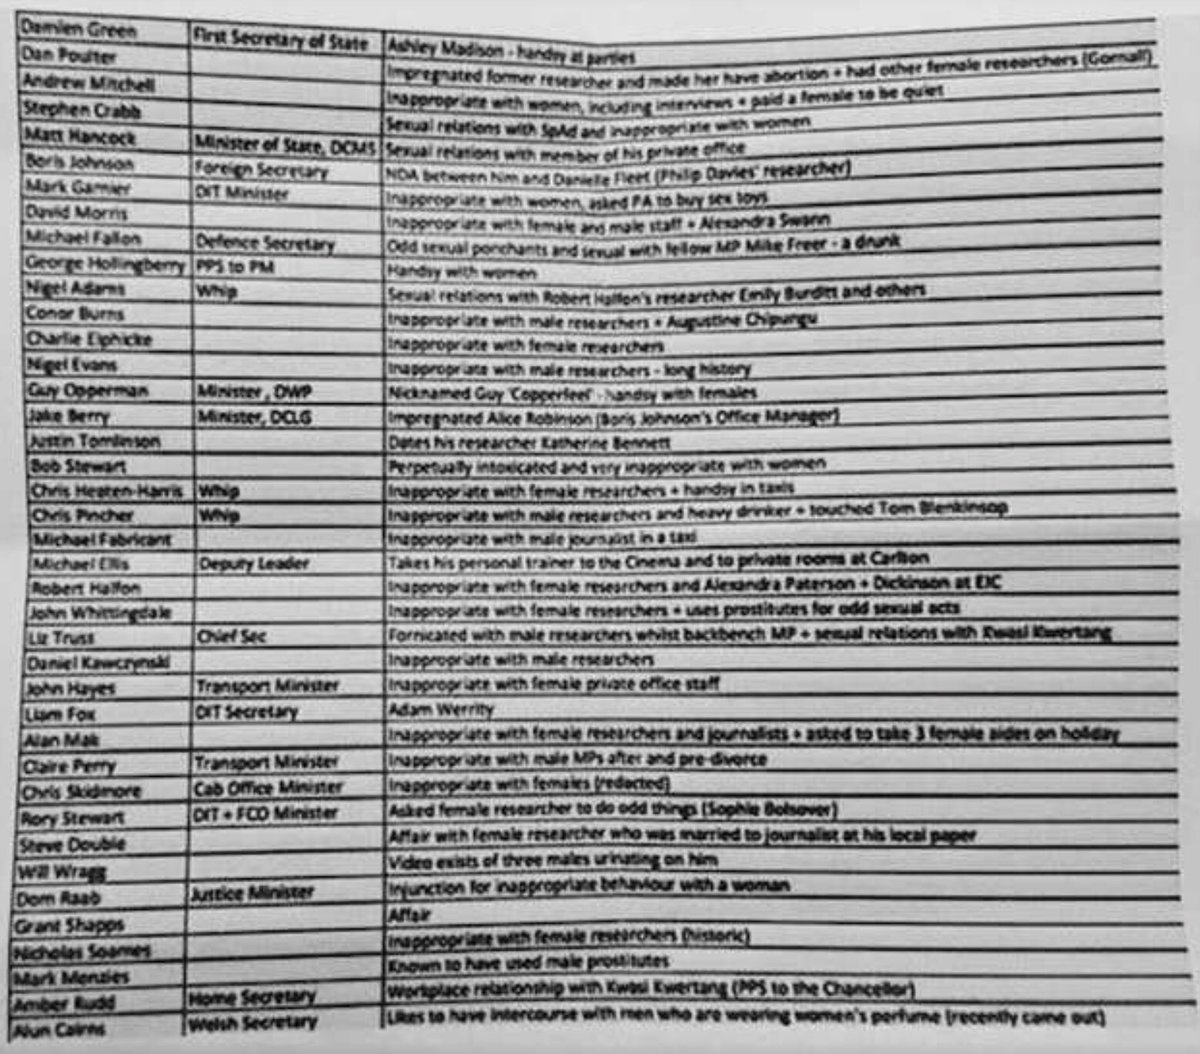 Westminster Spreadsheet Intended For The Dirty Dossier: The Full List Of Mps Named In The 'sex Dossier